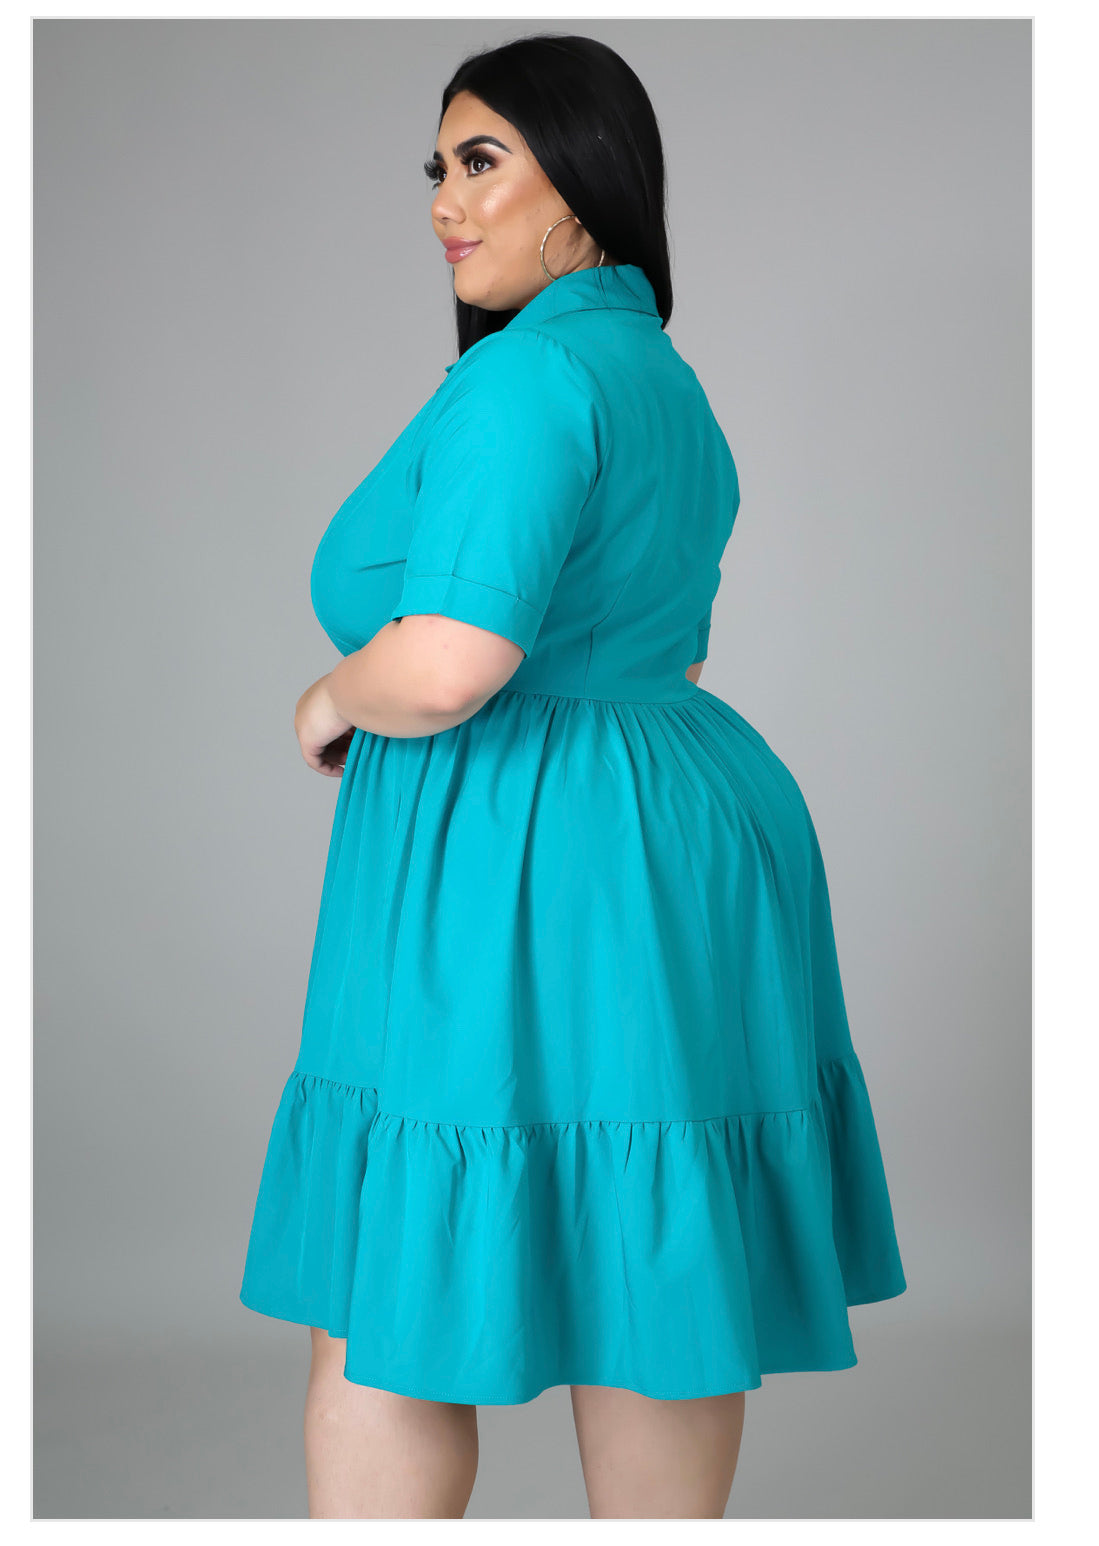 plus size dress. color is jade. button closure, collar at the neck, has sleeves. above the knee. 